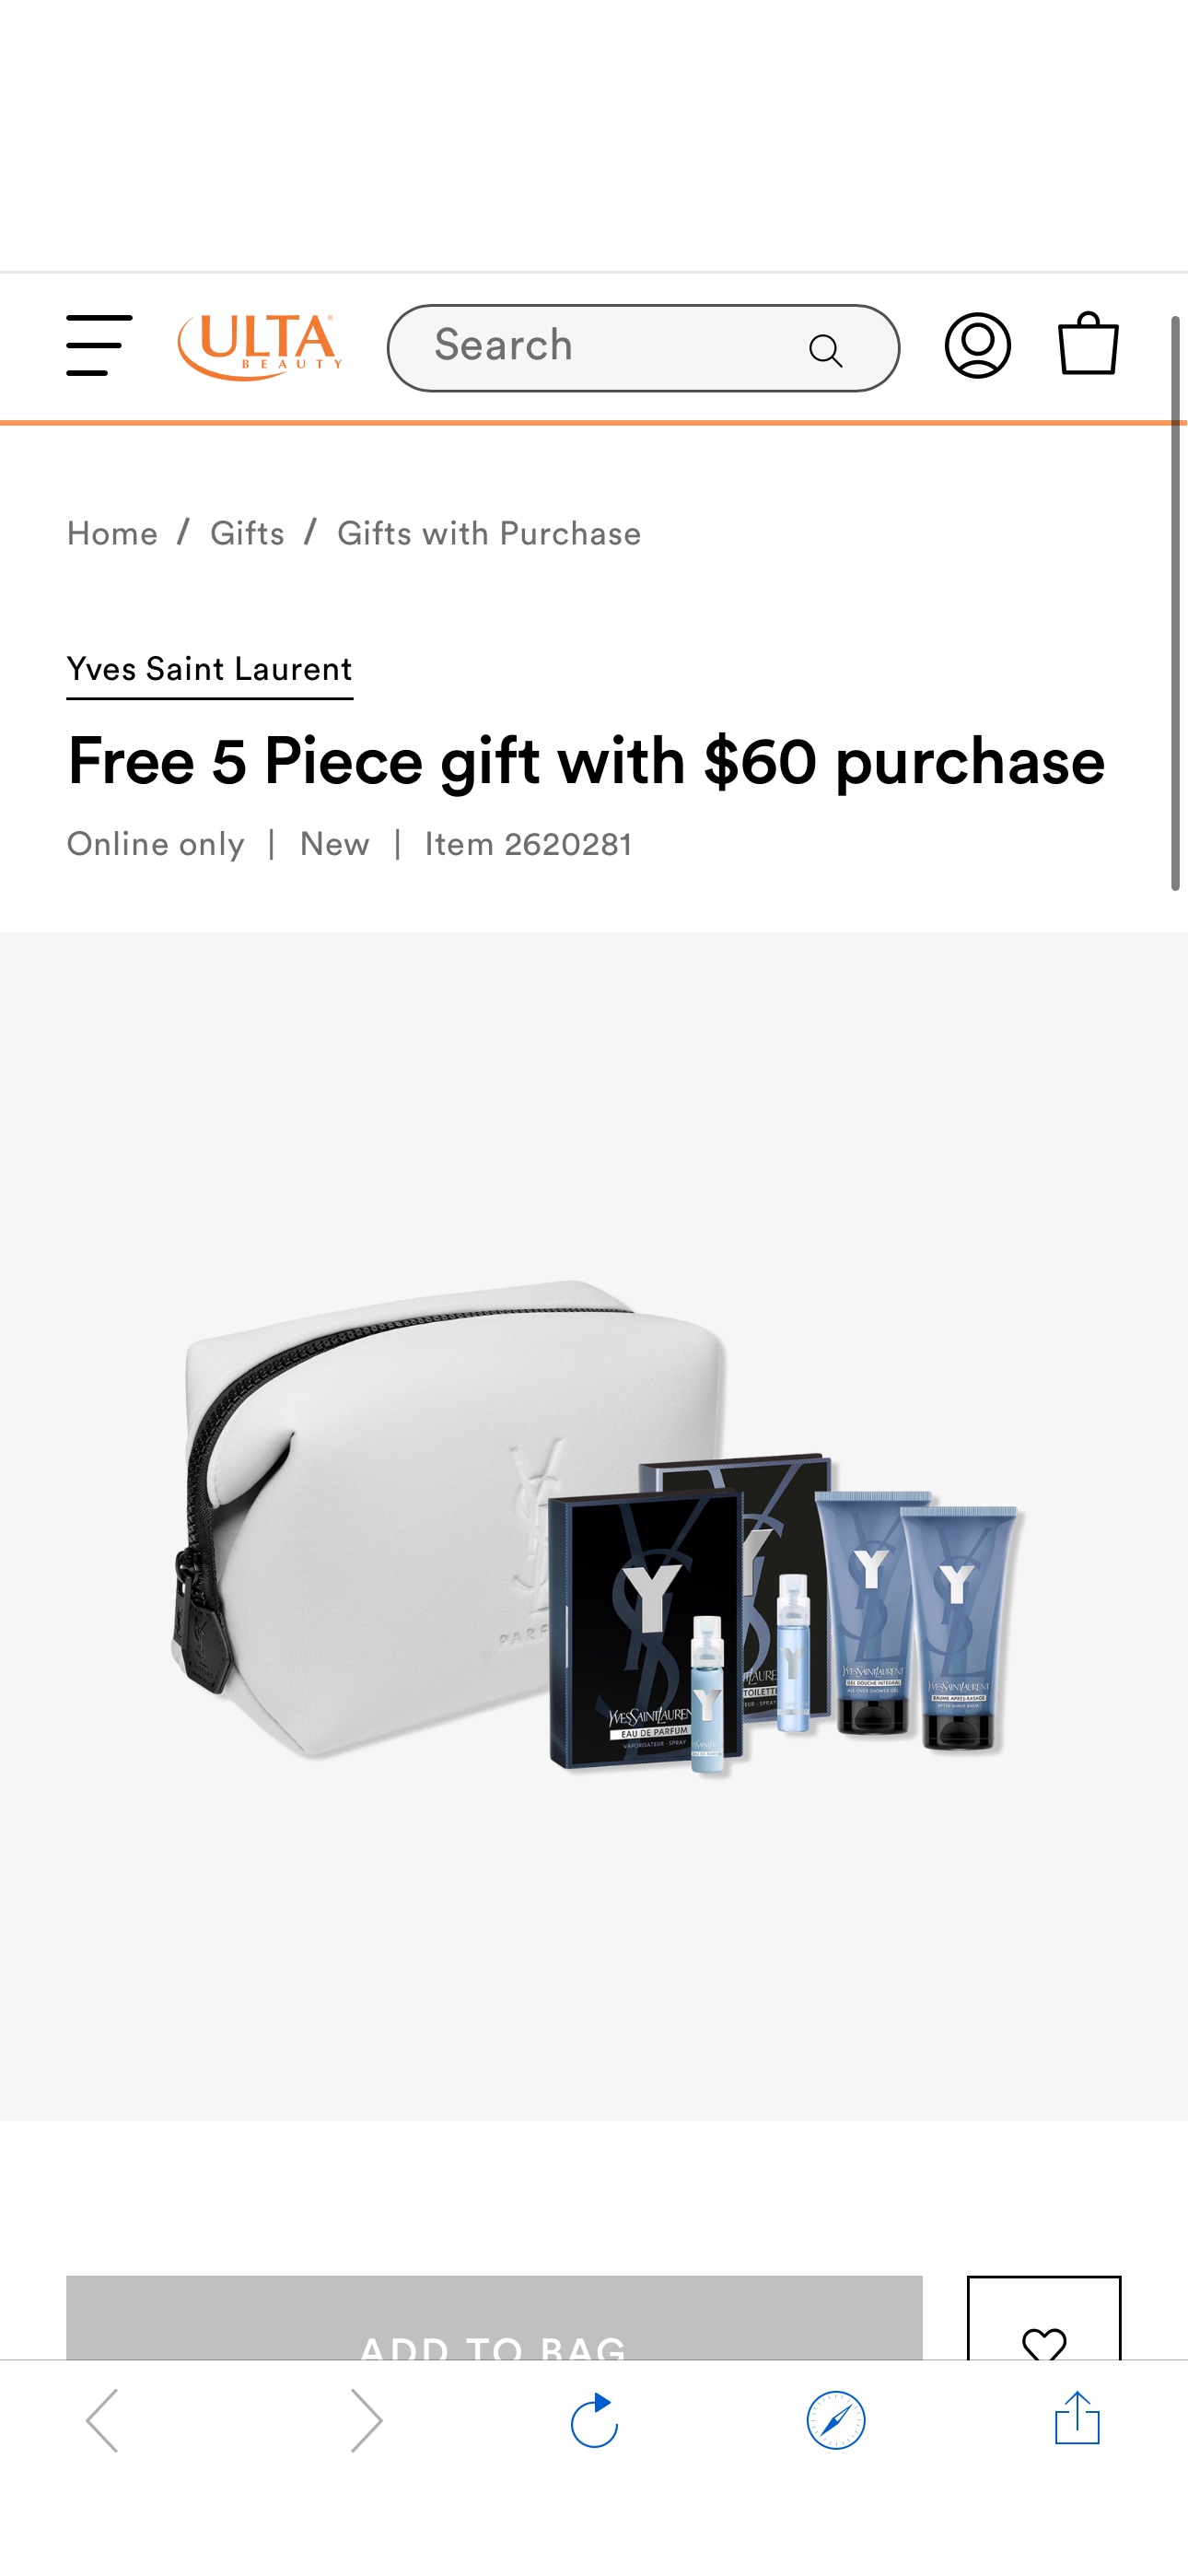 Free 5 Piece gift with $60 purchase - Yves Saint Laurent | Ulta Beauty